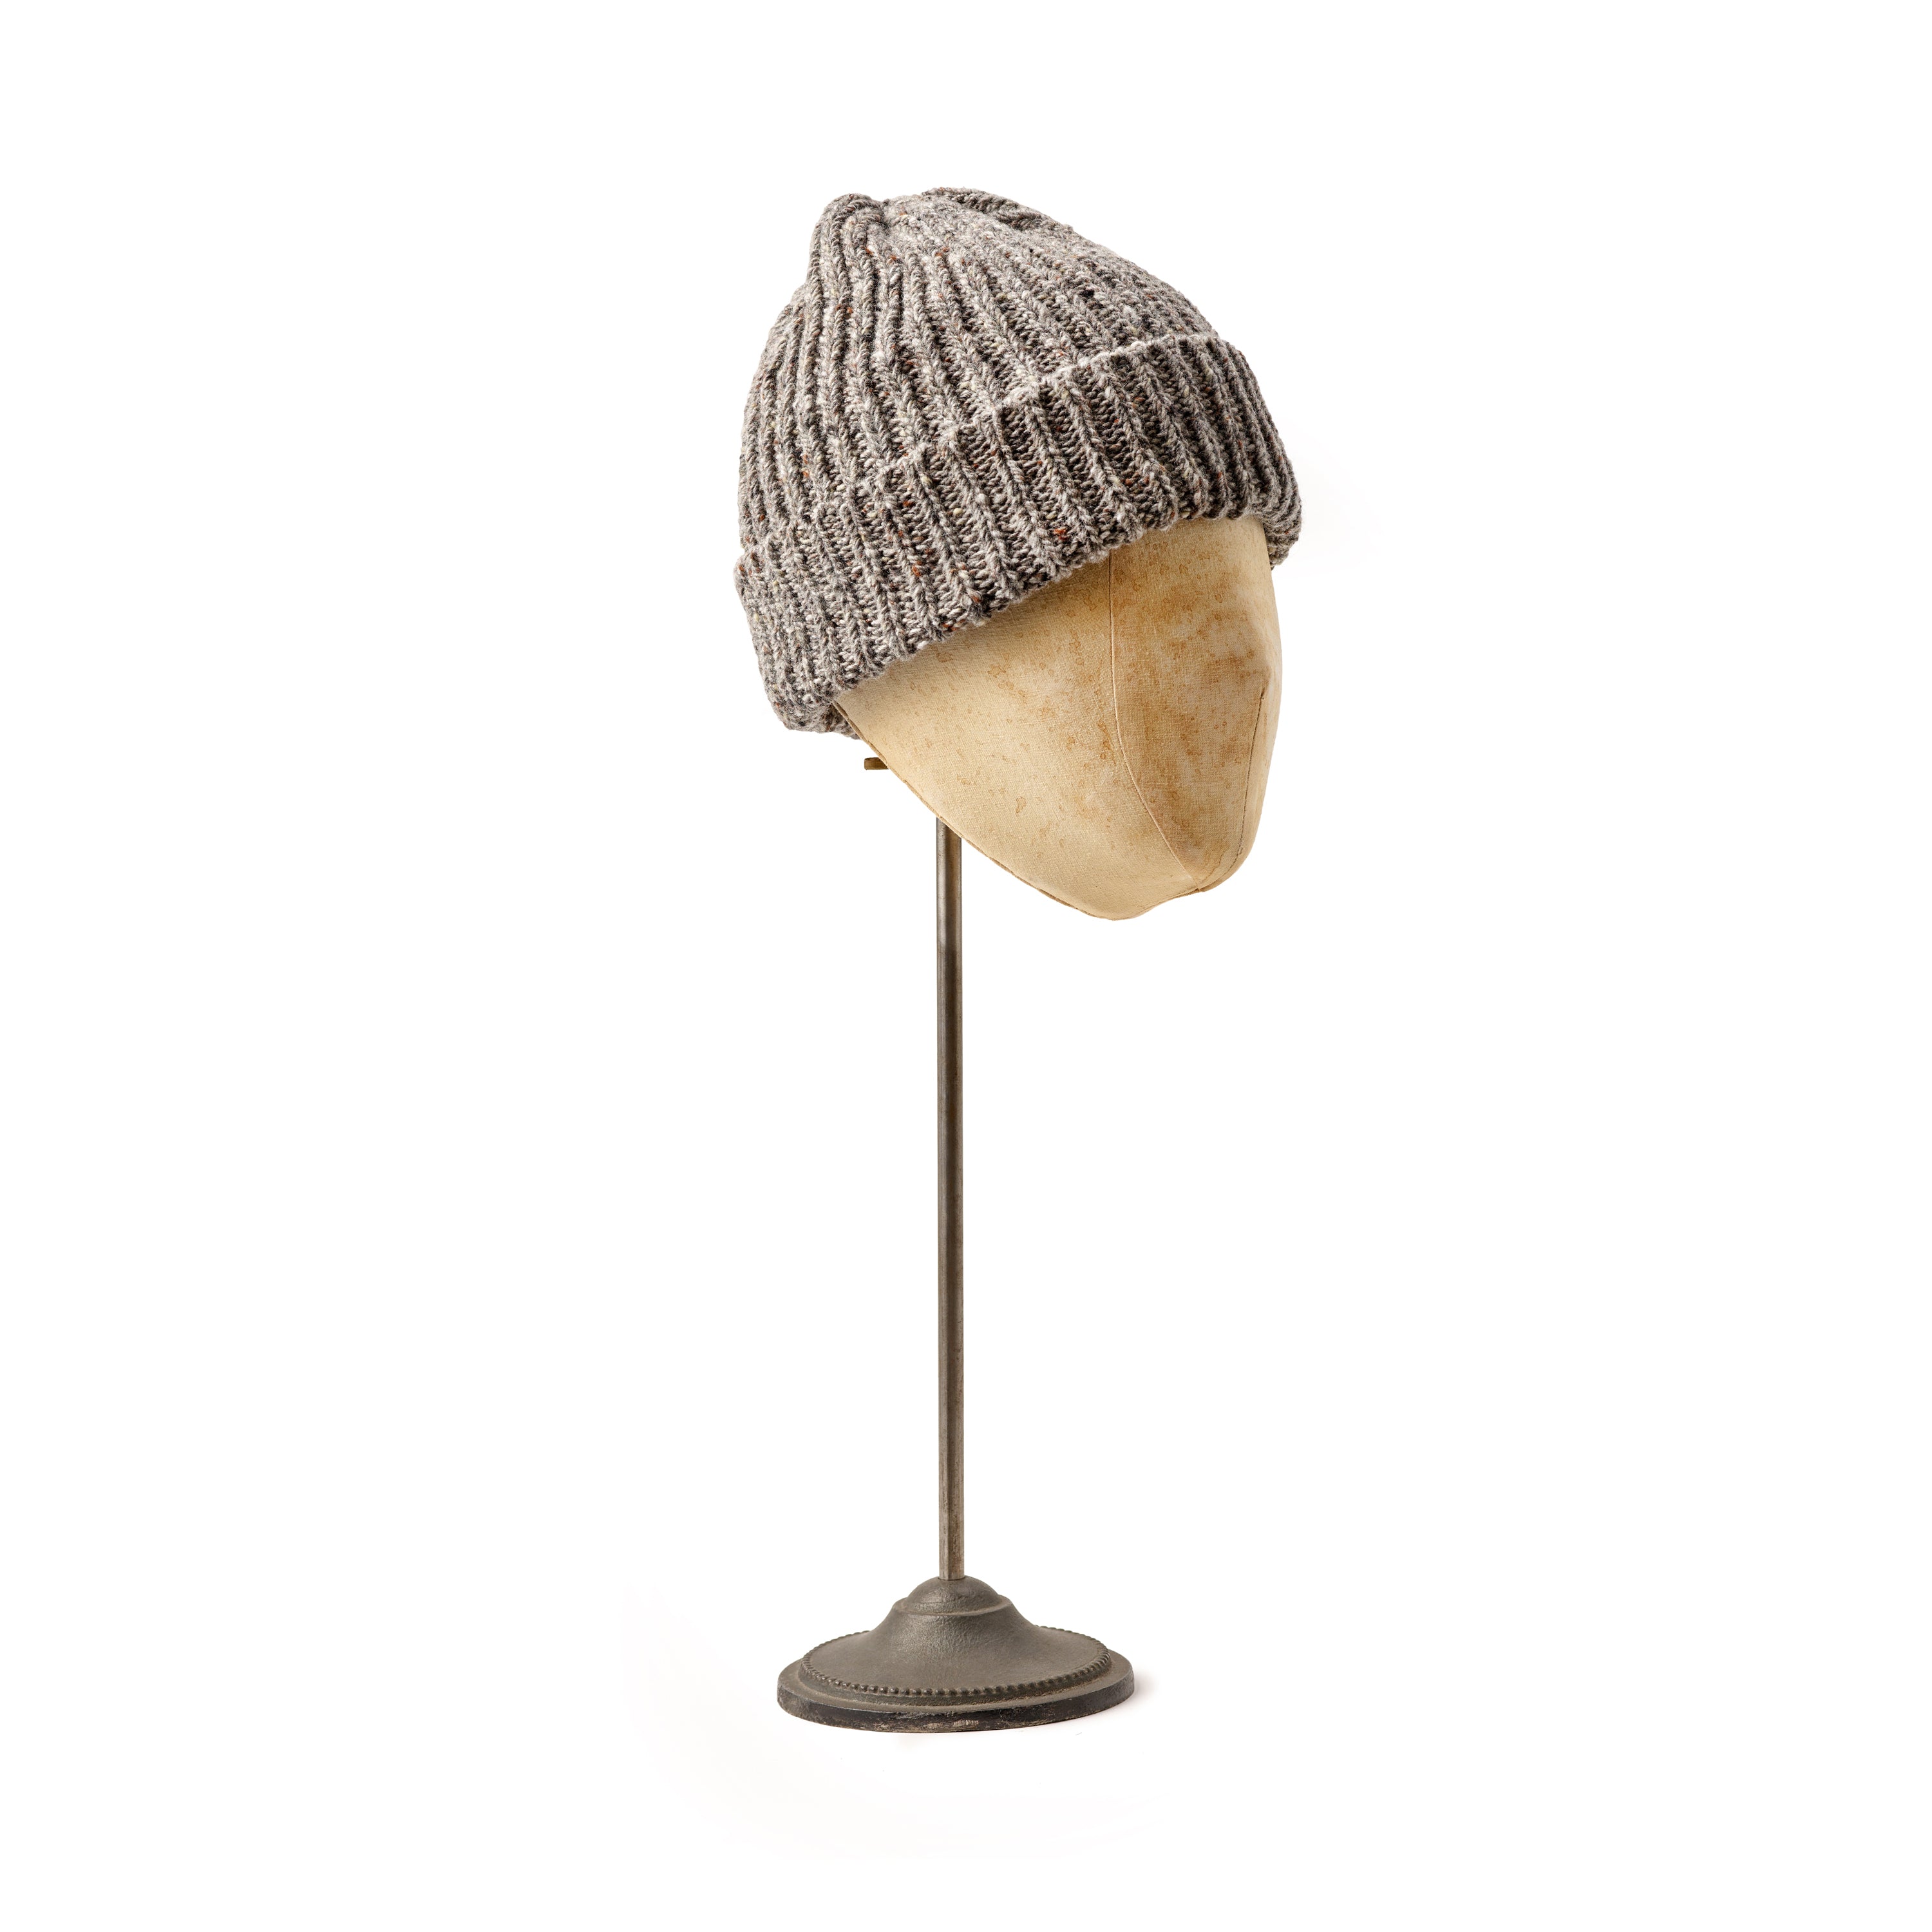 Corgi Ribbed Donegal Wool Silver Knitted Cap